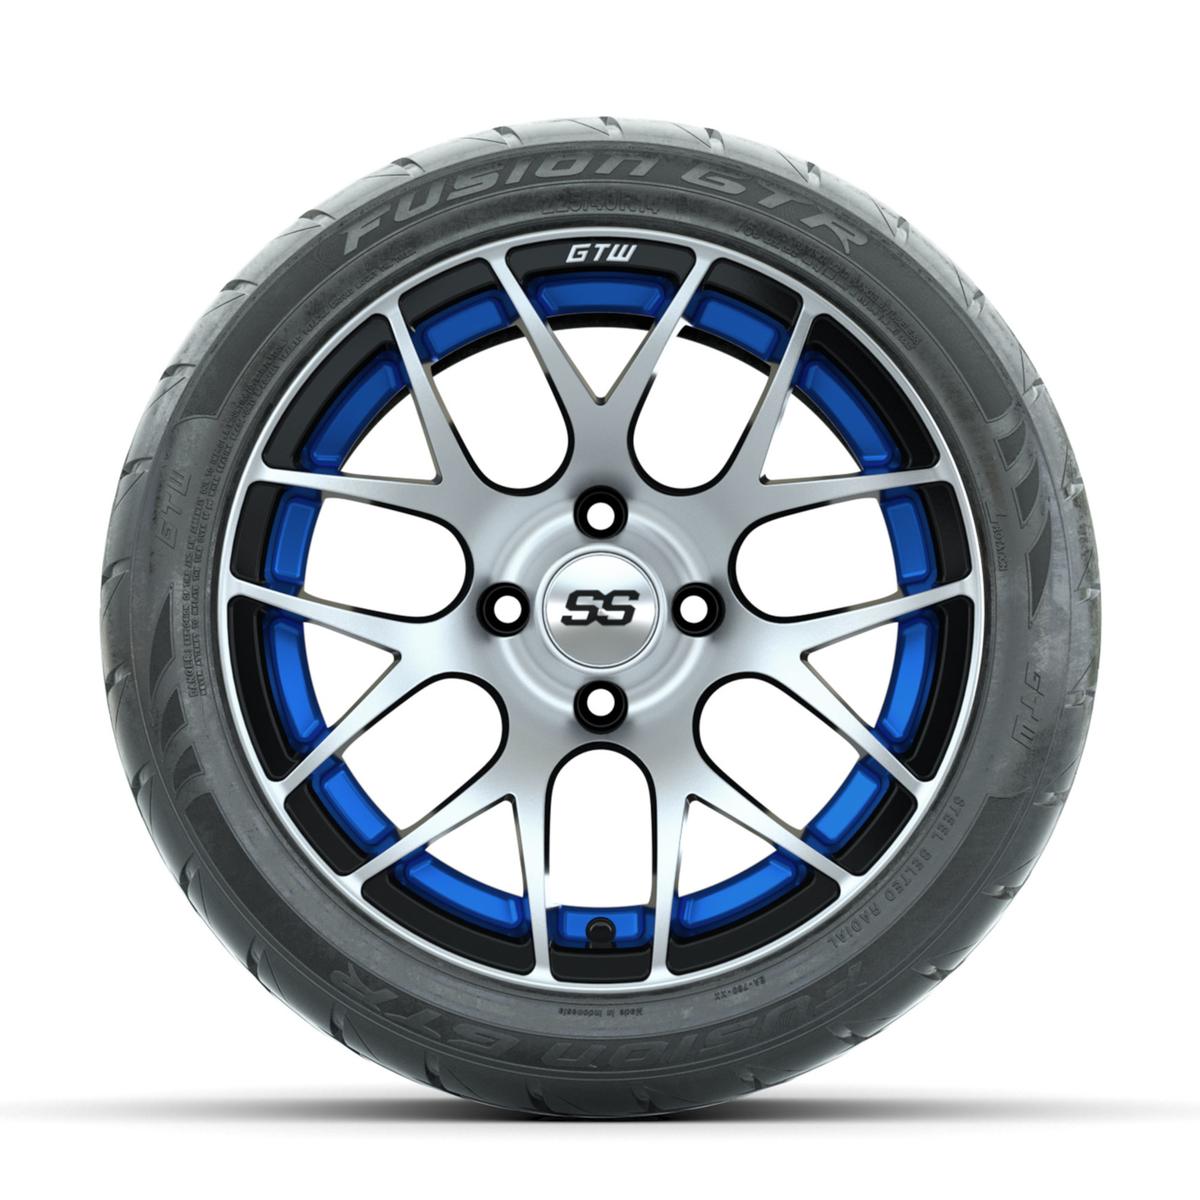 GTW Pursuit Machined/Blue 14 in Wheels with 225/40-R14 Fusion GTR Street Tires – Full Set